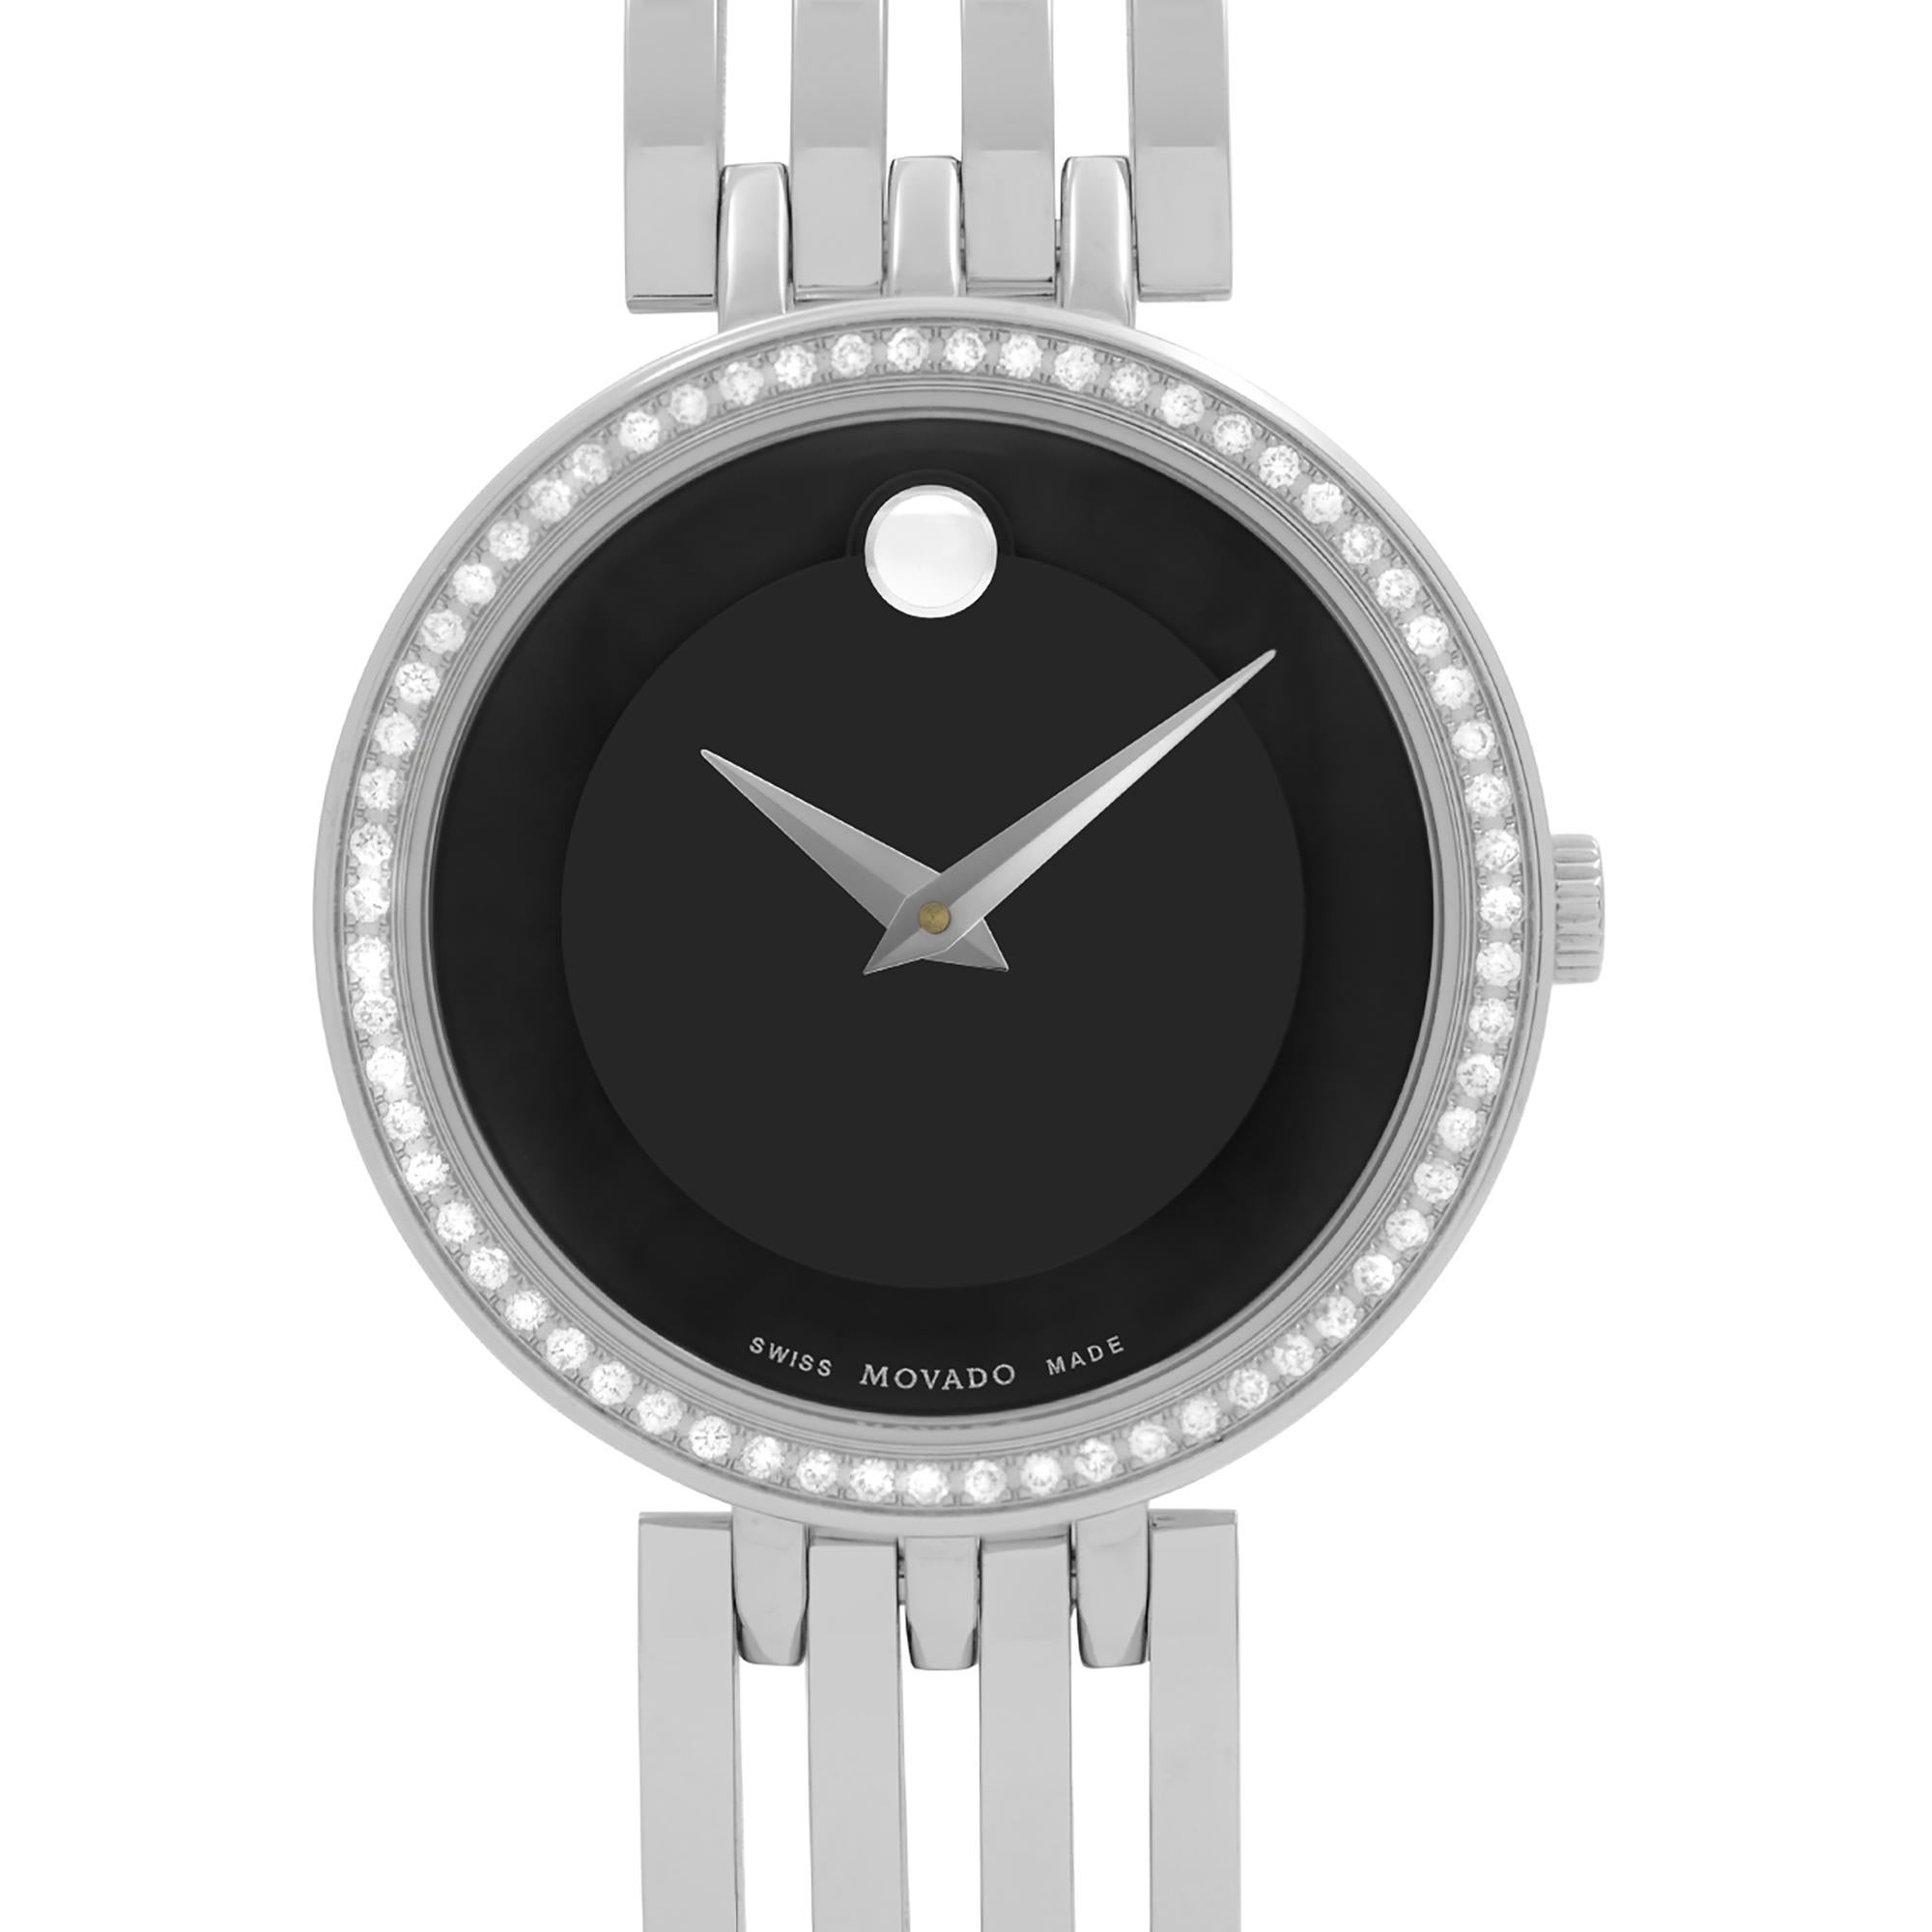 Unworn Movado Esperanza Diamonds Stainless Steel Black Dial Quartz Ladies Watch 0607052. This Beautiful Timepiece Features: Stainless Steel Case and Bracelet, Fixed Stainless Steel Bezel Set with Diamonds, Matte Black Dial with Silver-Tone Hands,